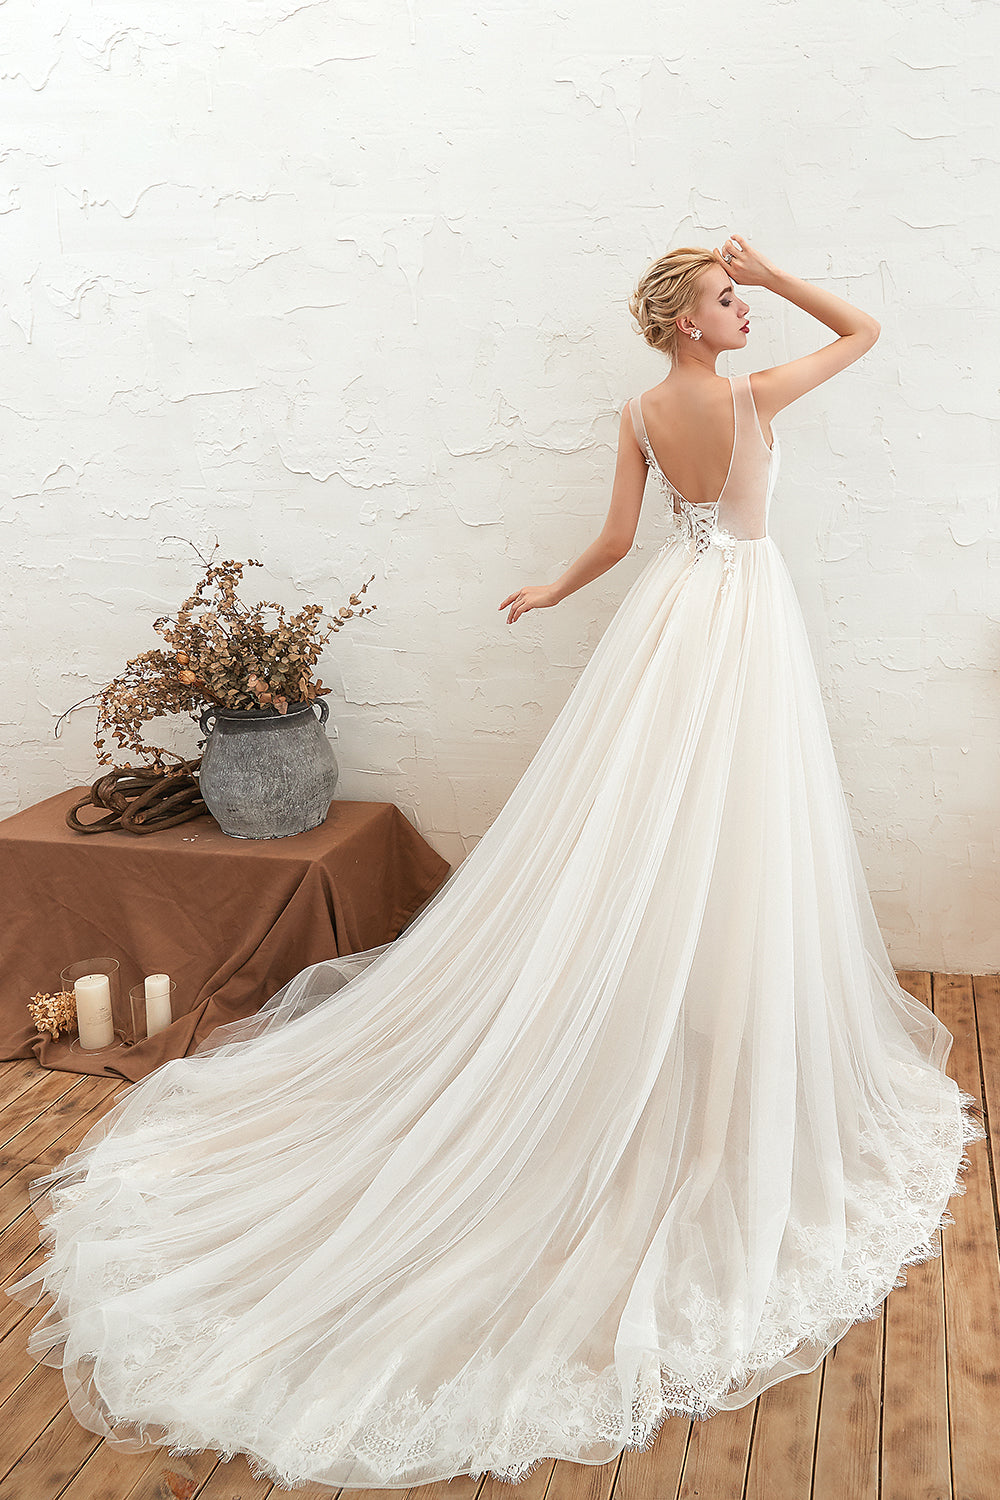 Affordable Tulle V-Neck Ruffle Long Wedding Dress with Appliques-27dress